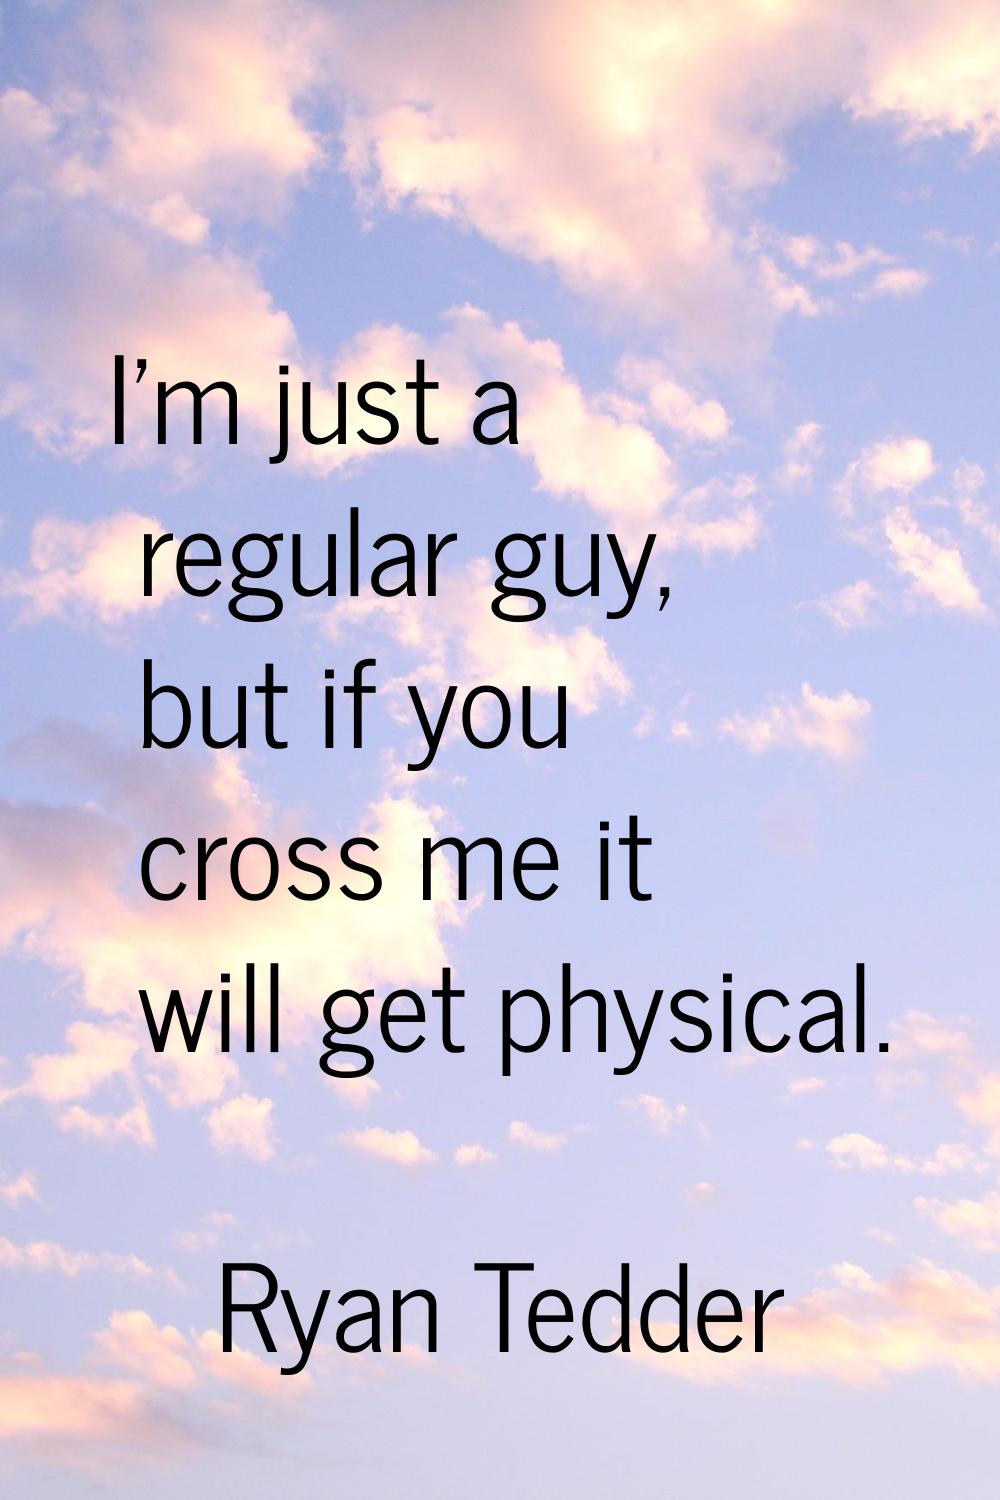 I'm just a regular guy, but if you cross me it will get physical.